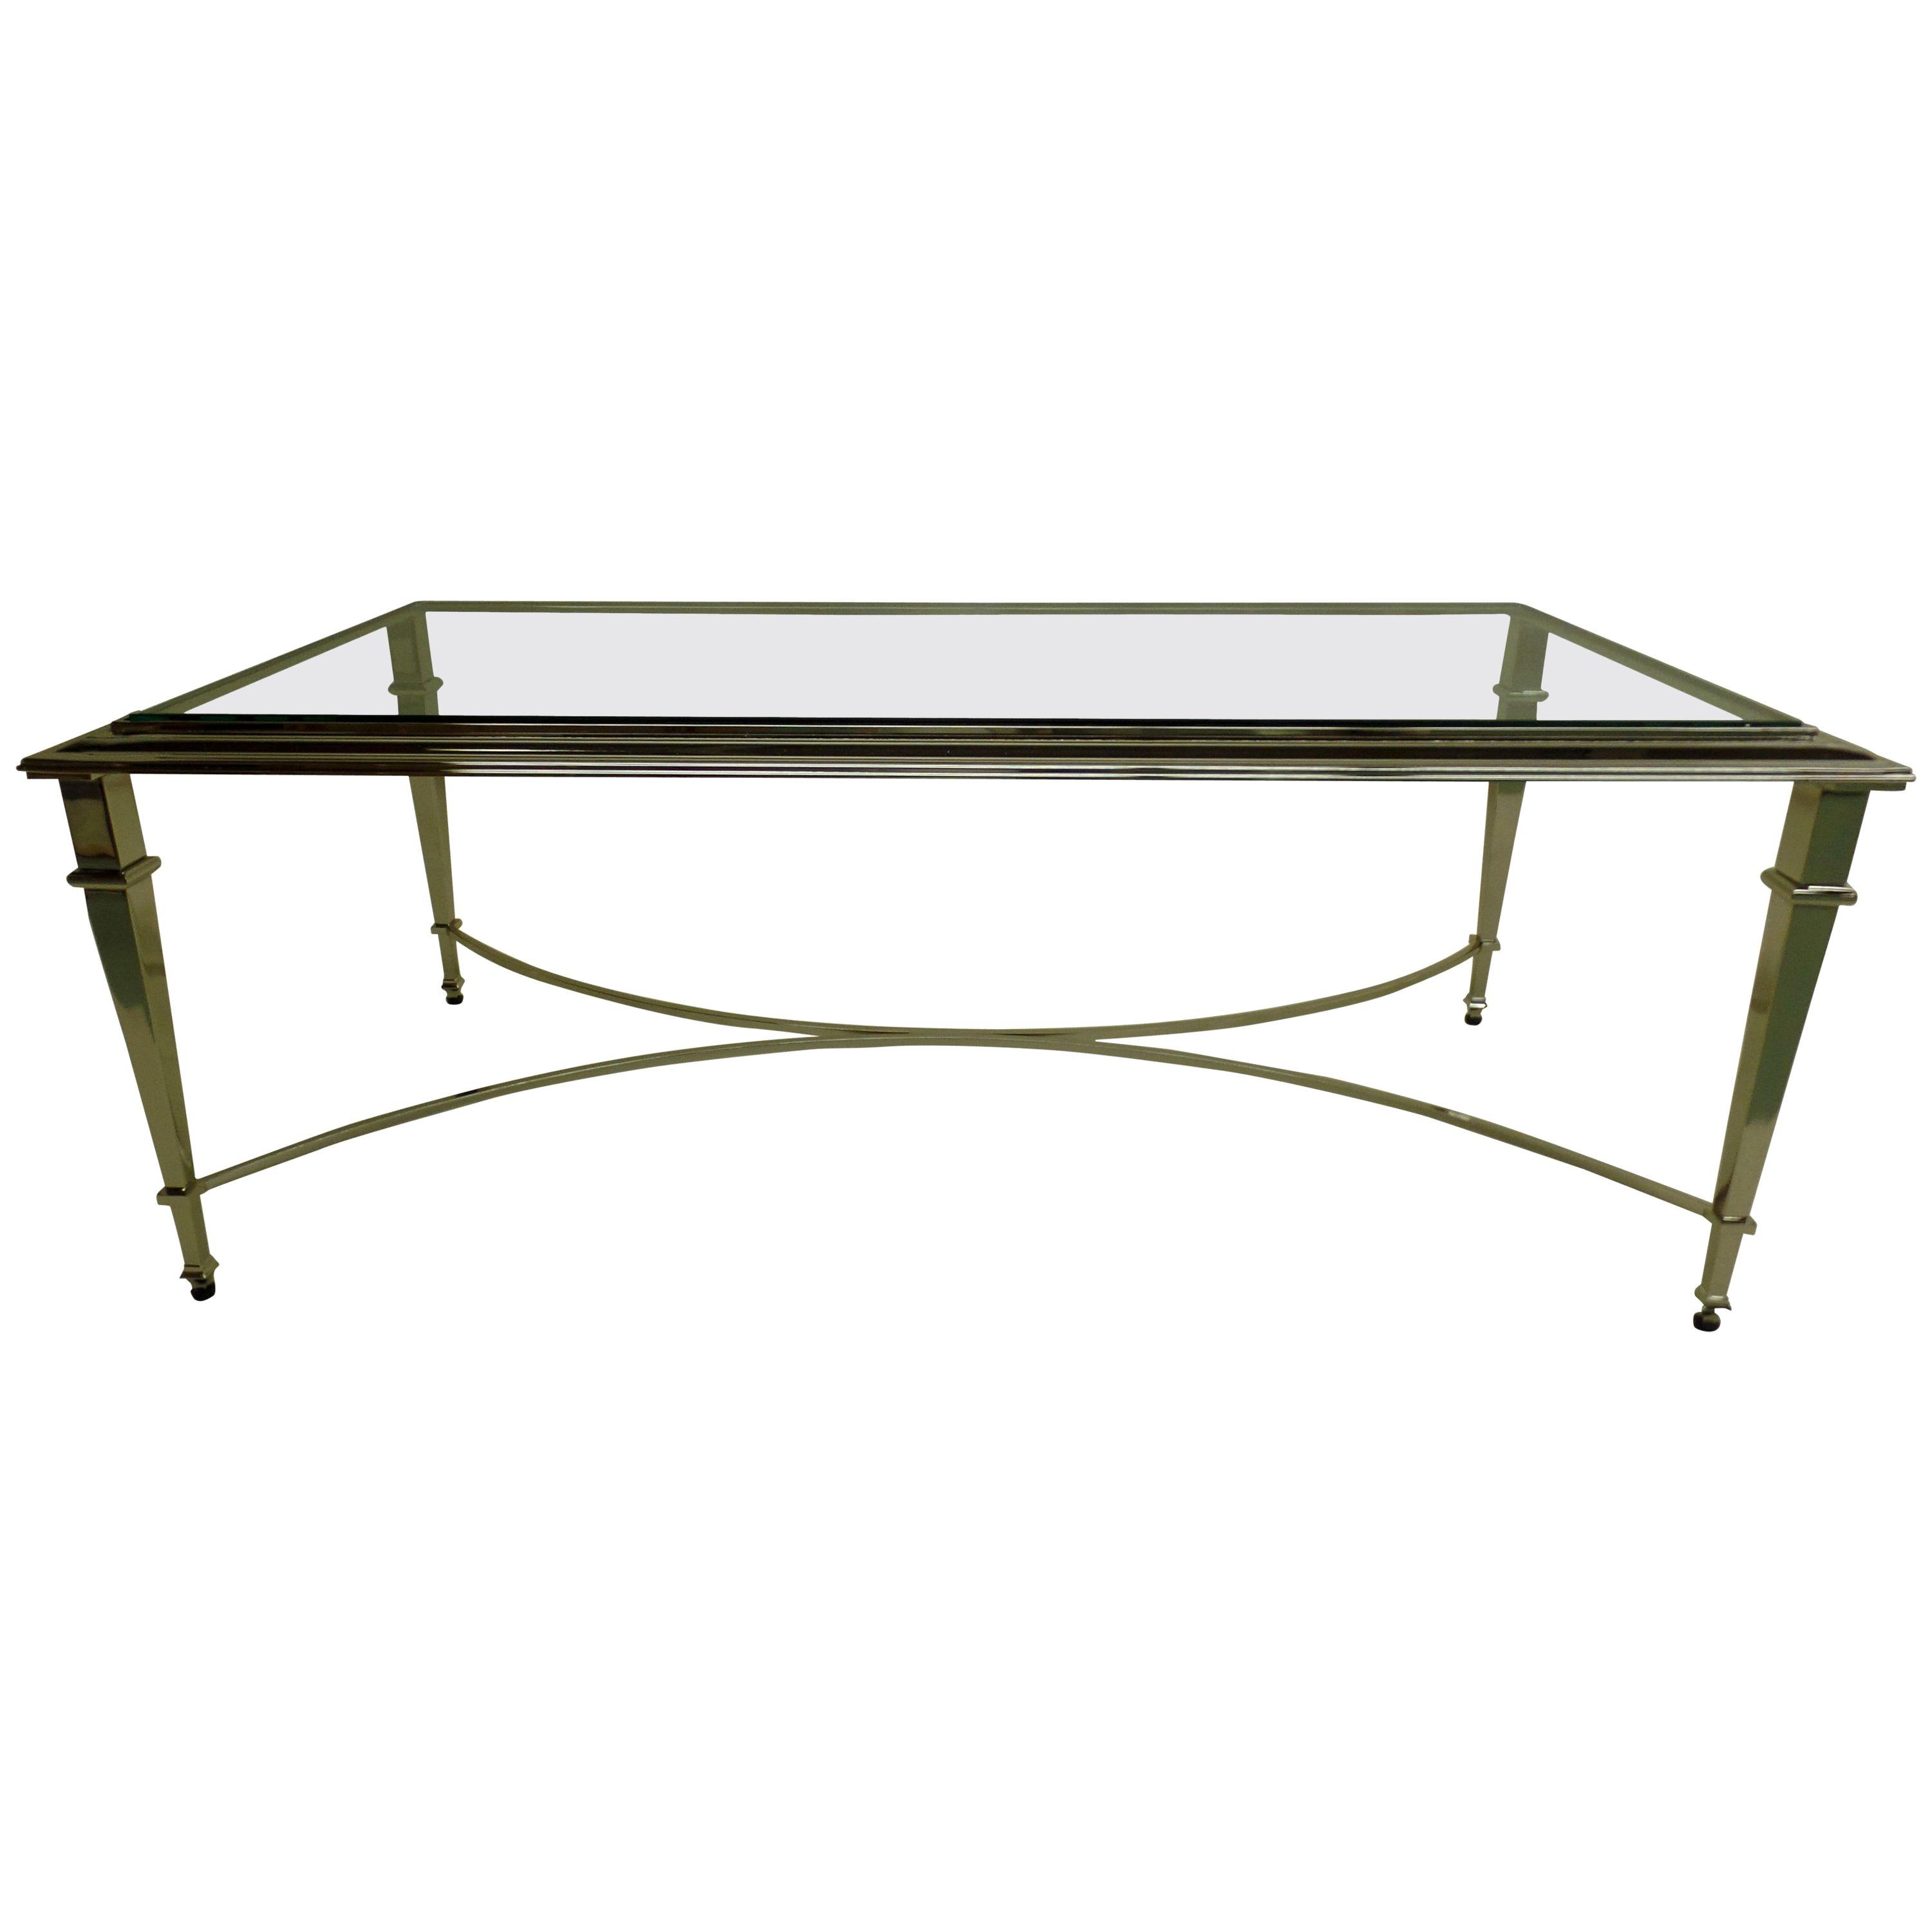 French Modern Neoclassical Polished Nickel and Glass Coffee Table, Maison Ramsay